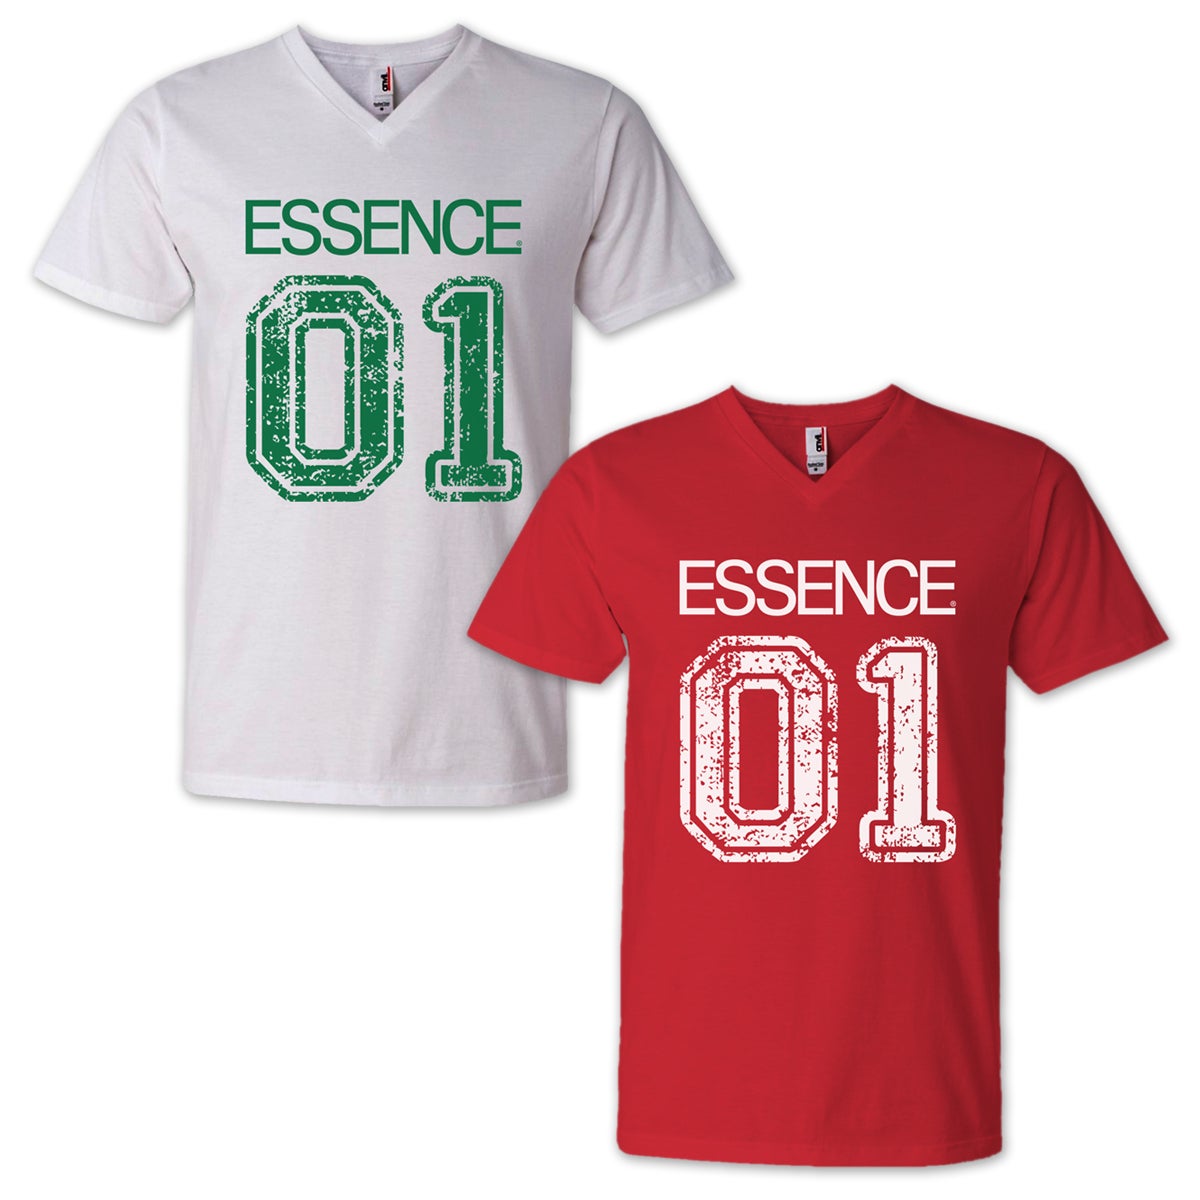 You're Going To Love This ESSENCE Merchandise!